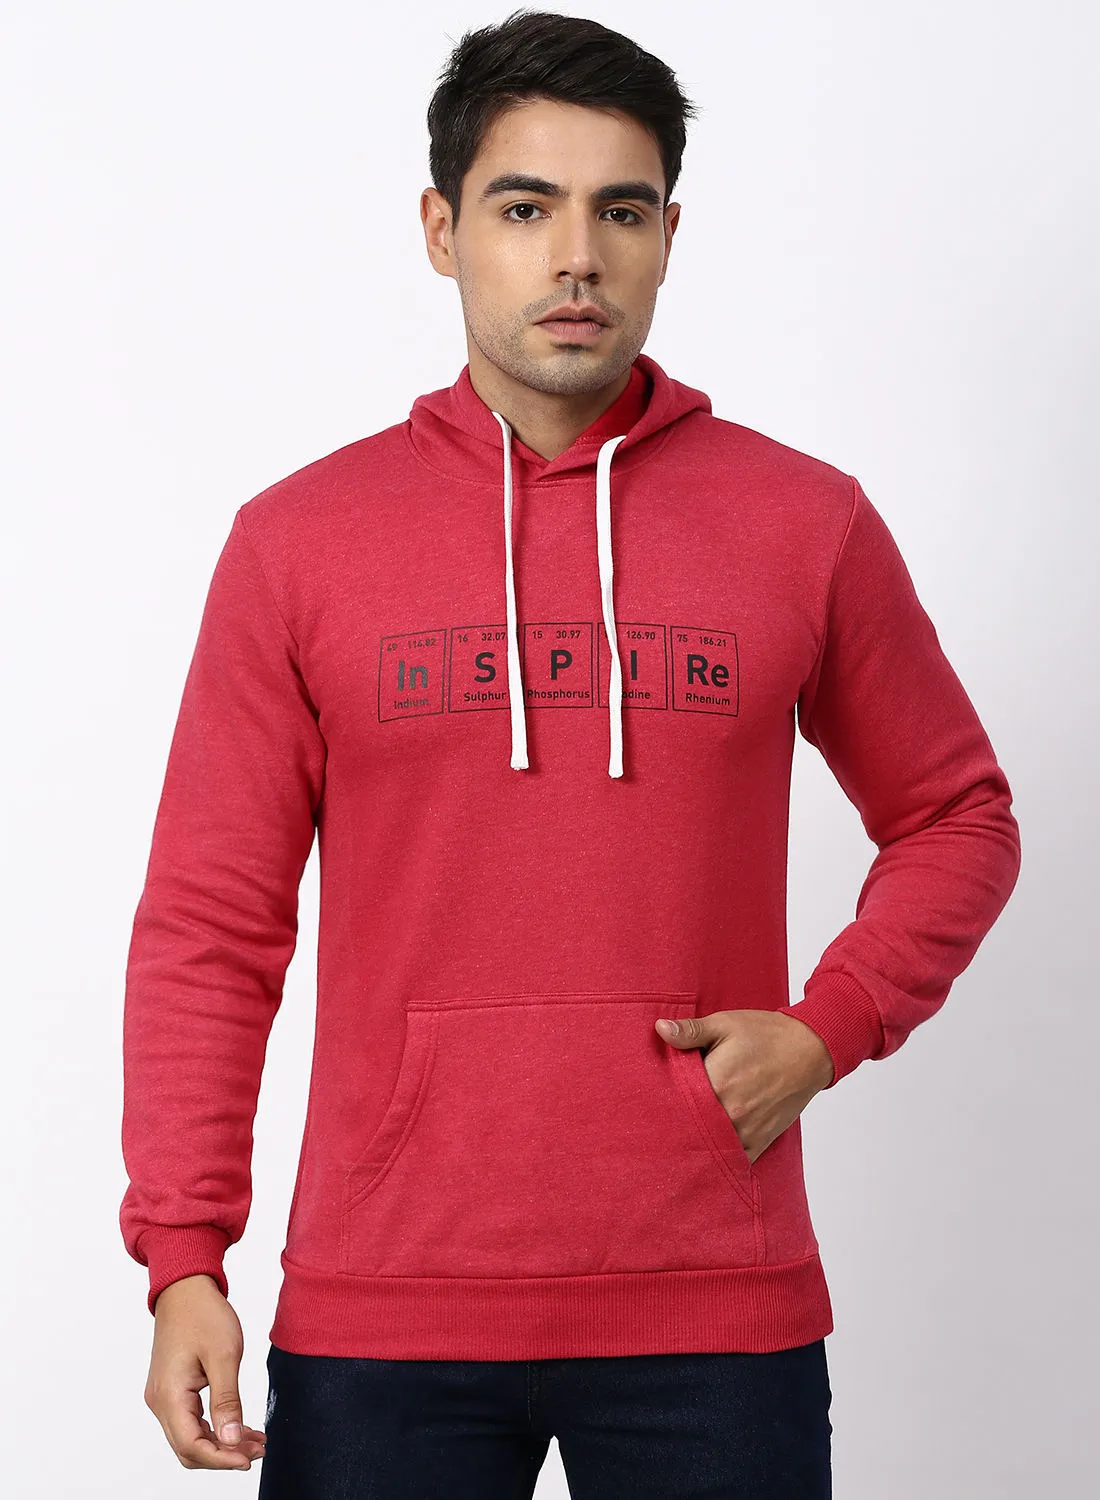 Campus Sutra Stylish Comfortable Hoodie Maroon Red